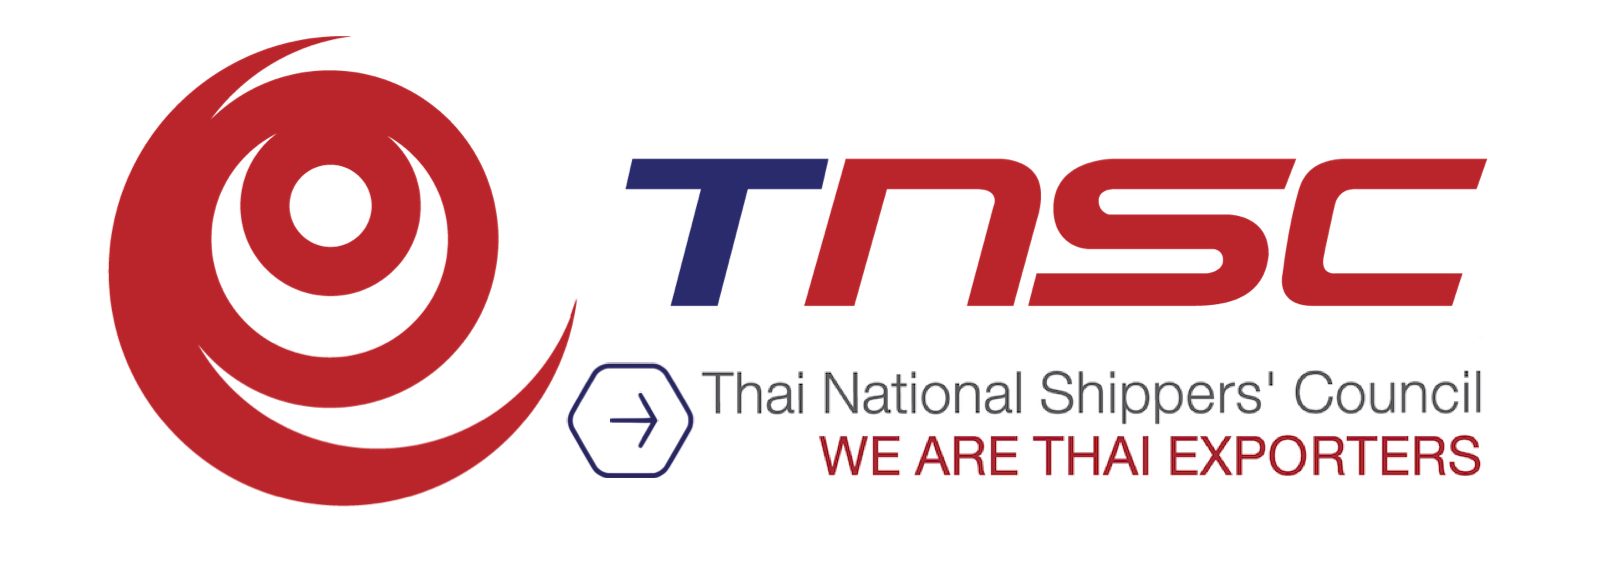 Thai National Shippers' Council